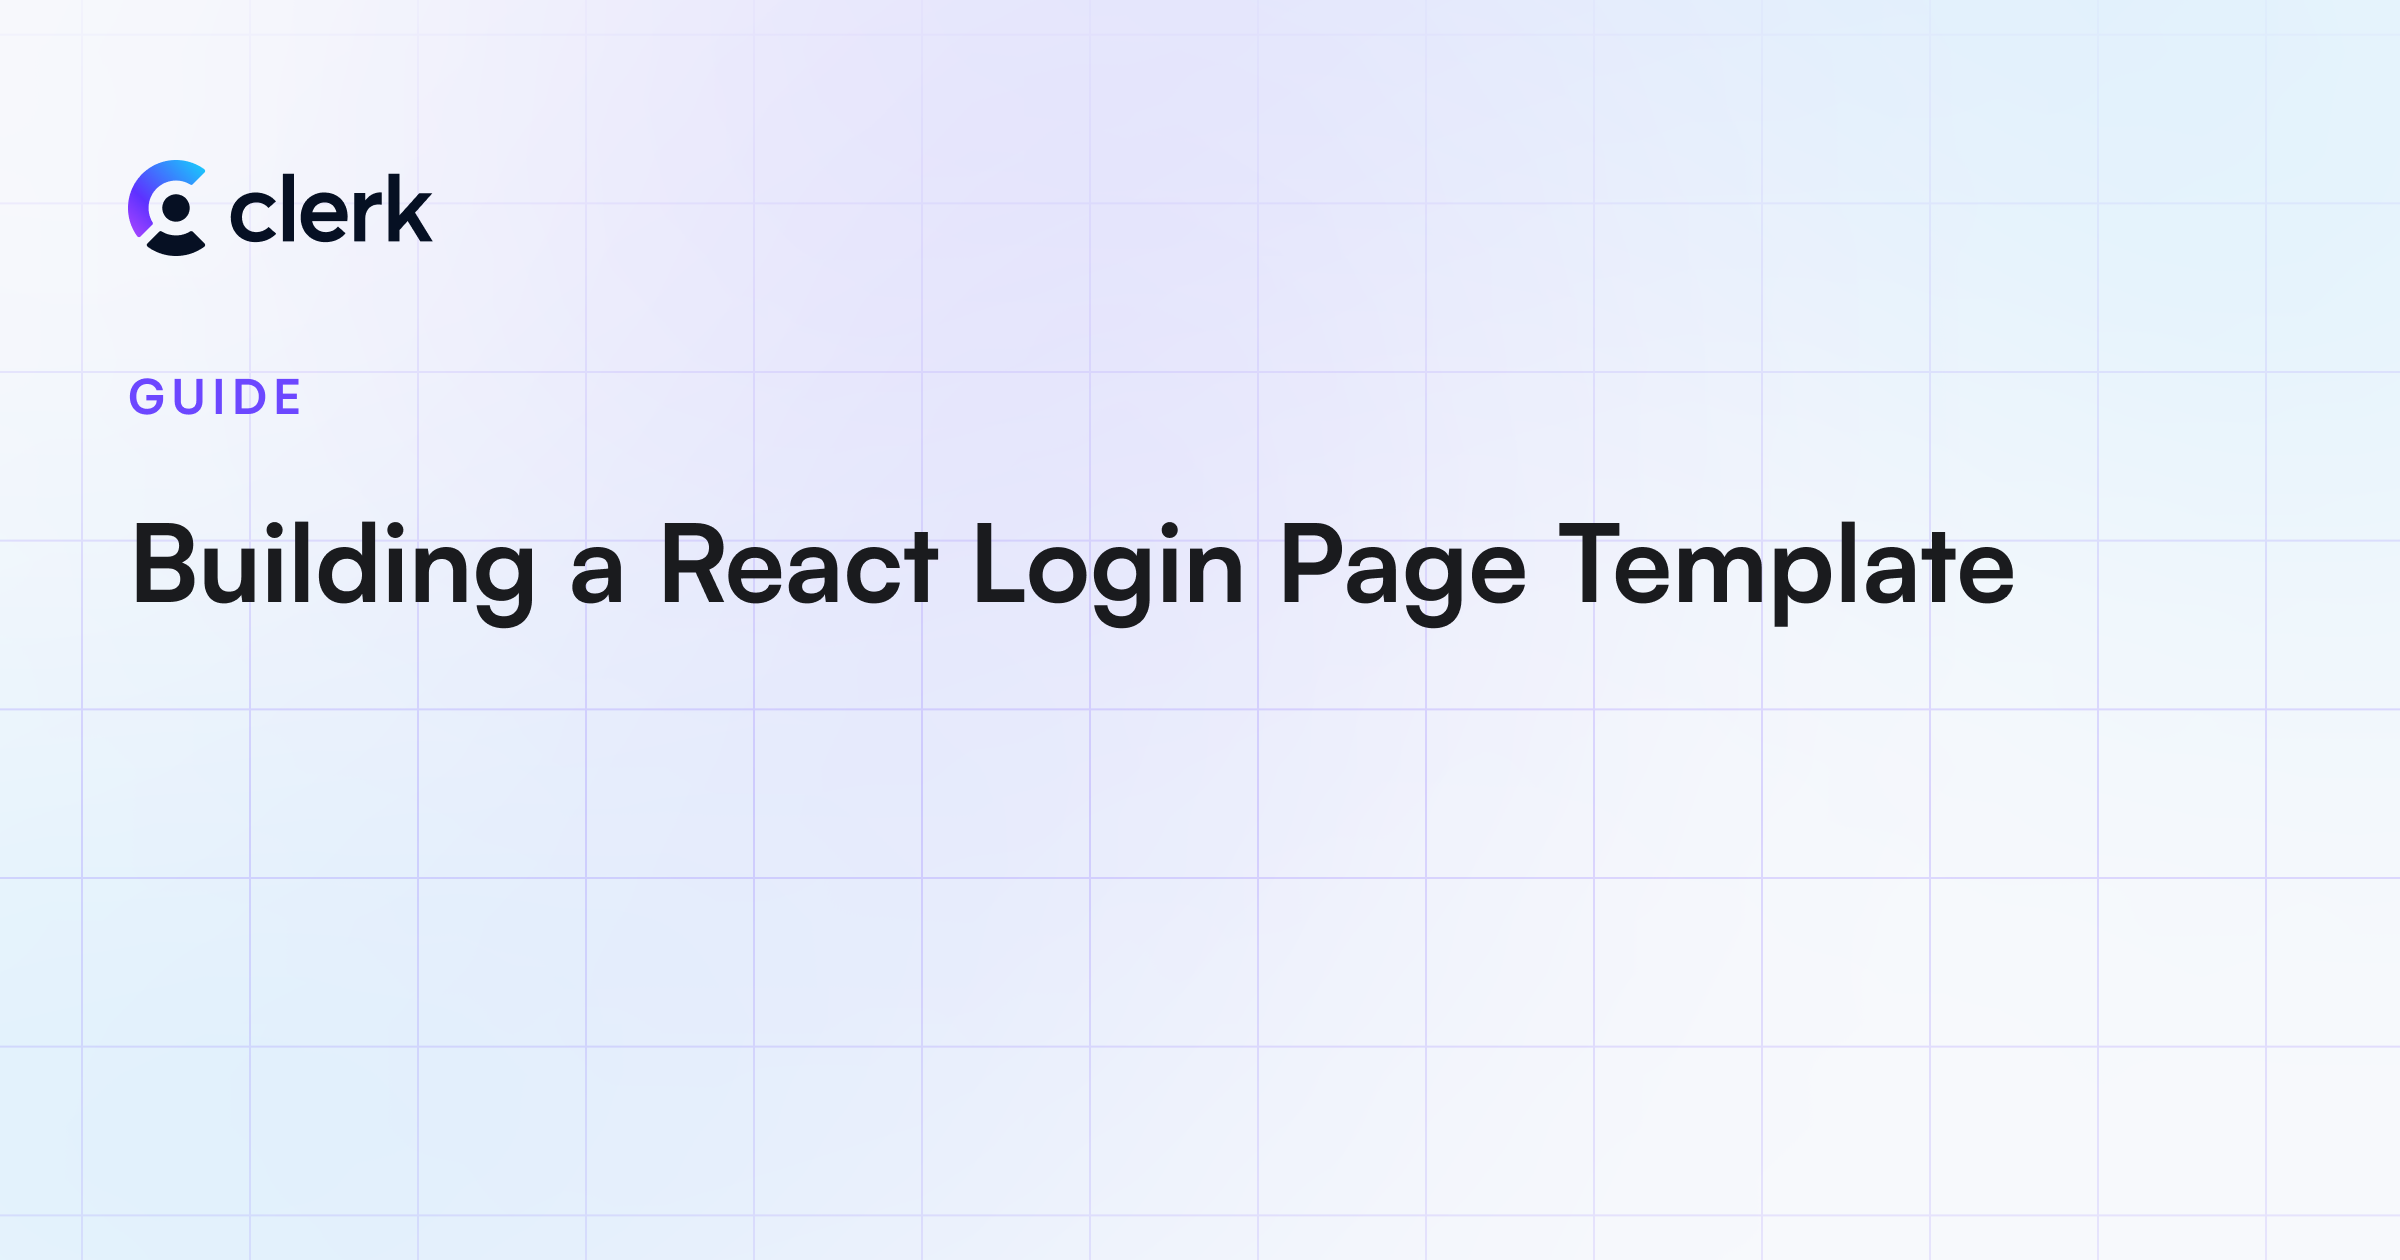 Building a React Login Page Template